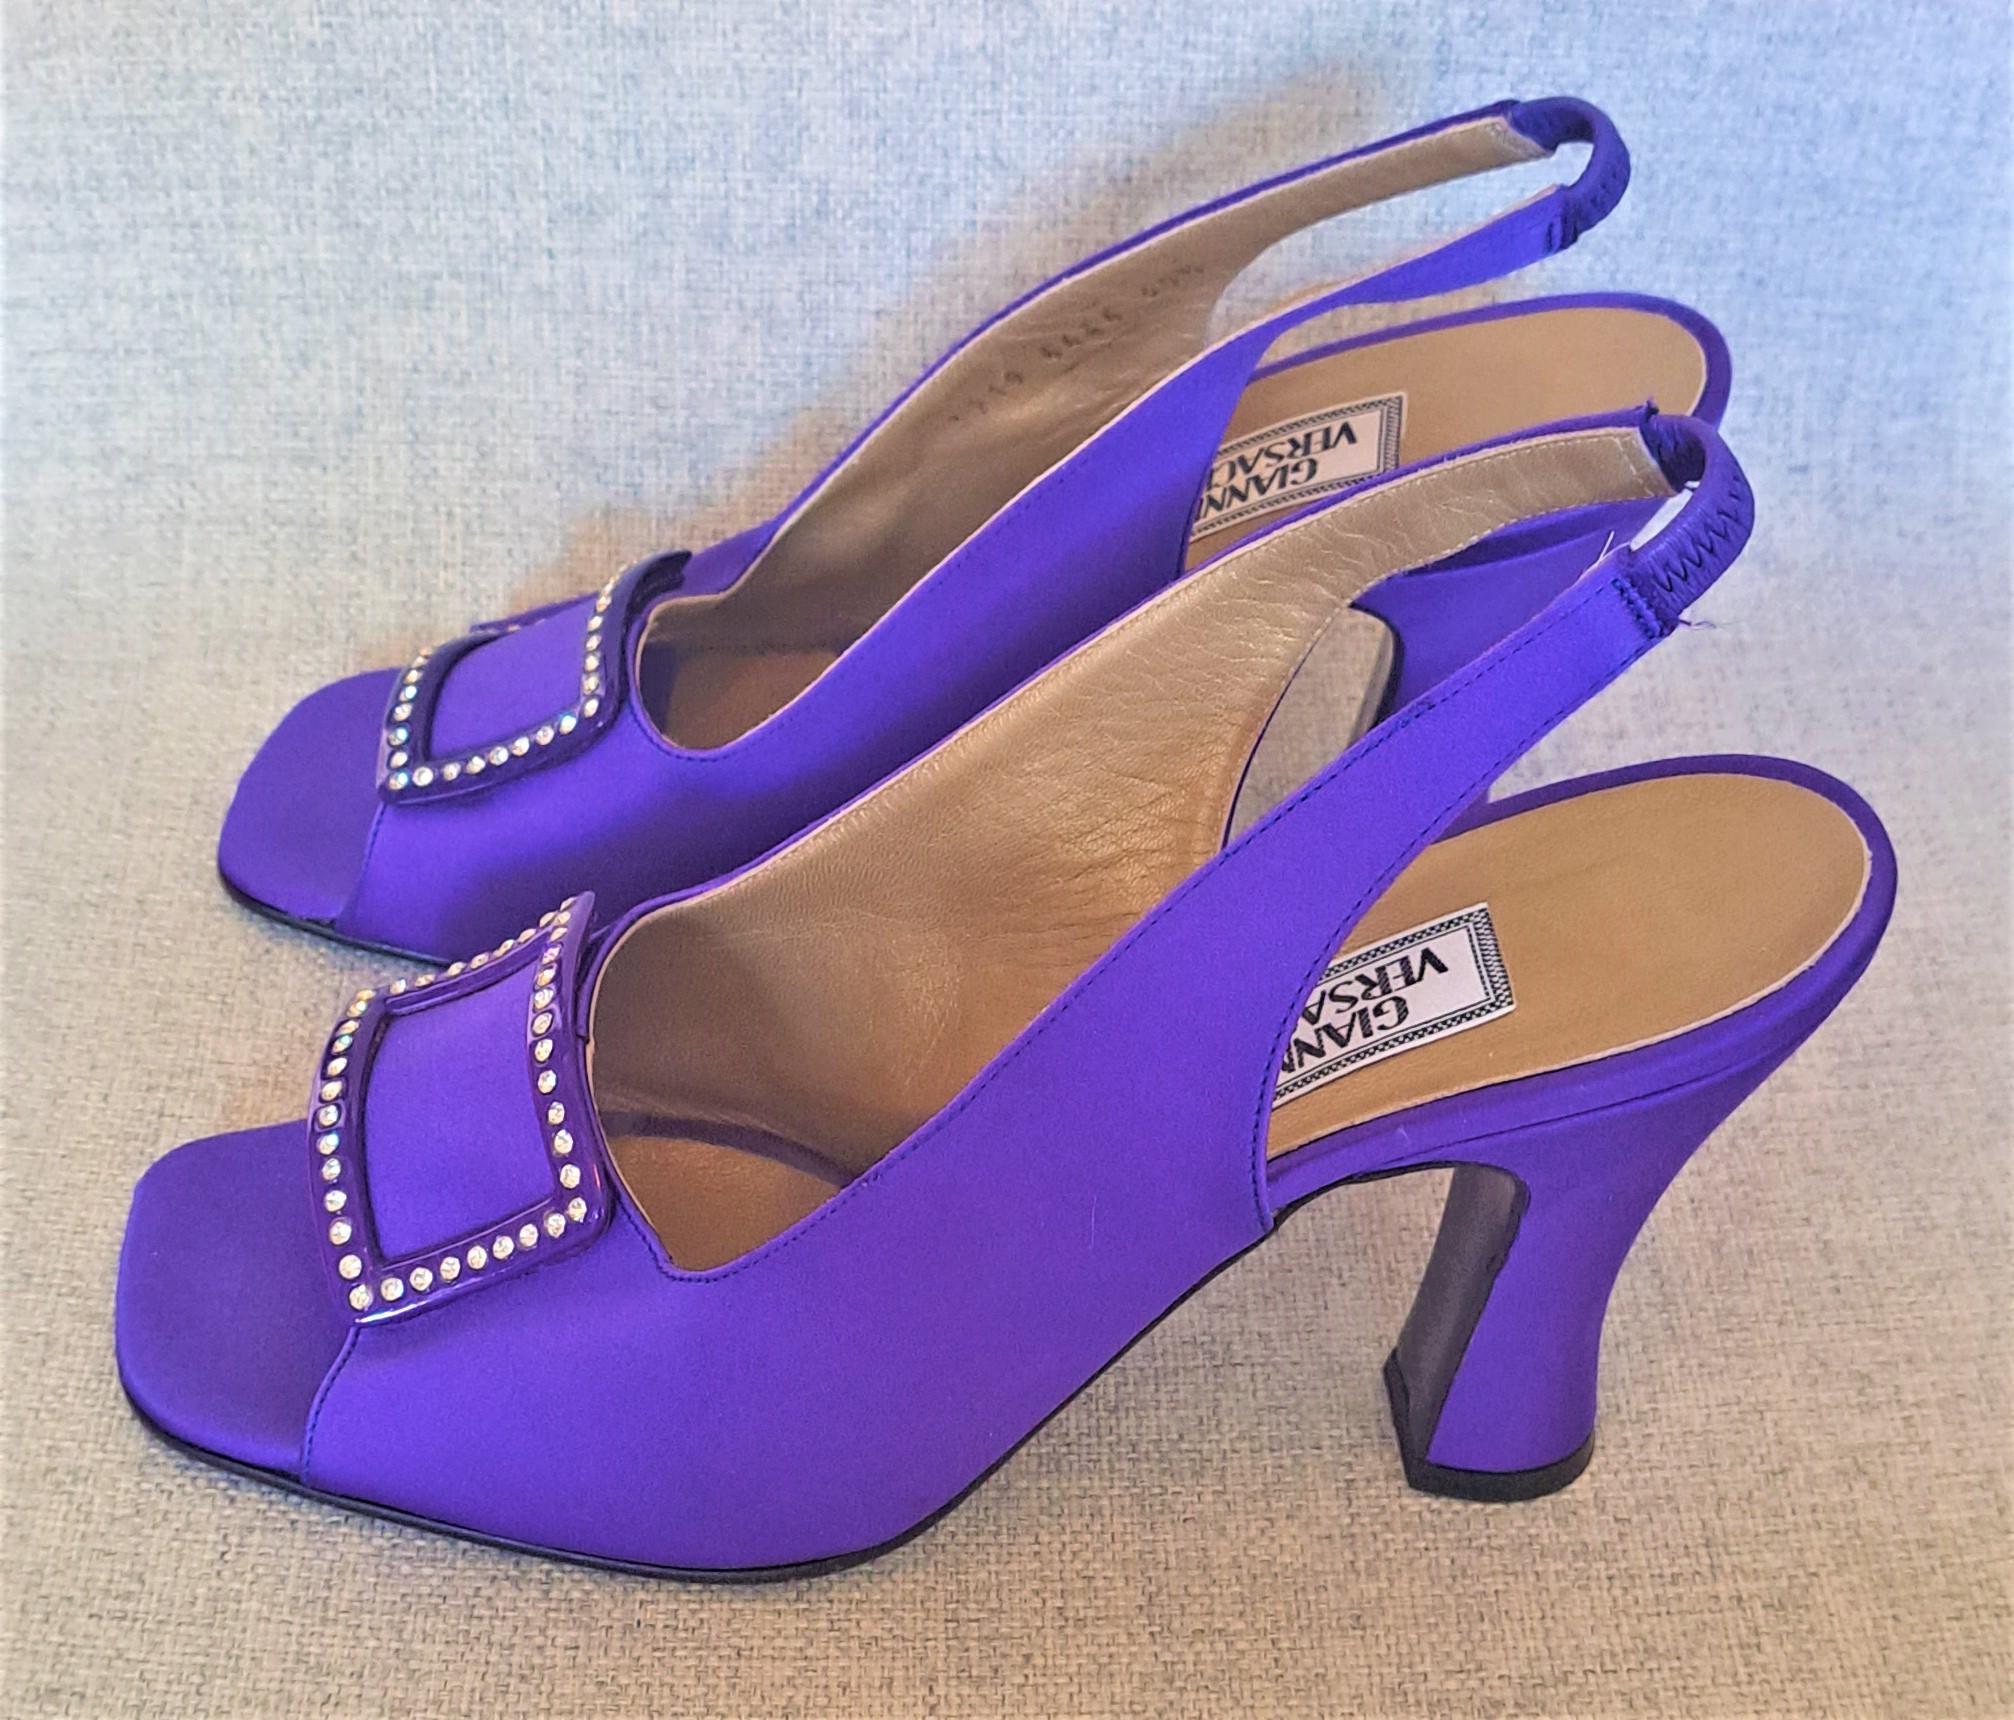 The vintage 90s Gianni Versace purple satin open-toe slingback with rhinestones is a glamorous and iconic shoe design from the fashion house of Gianni Versace. The shoe features a sleek and shiny purple satin material that is embellished with